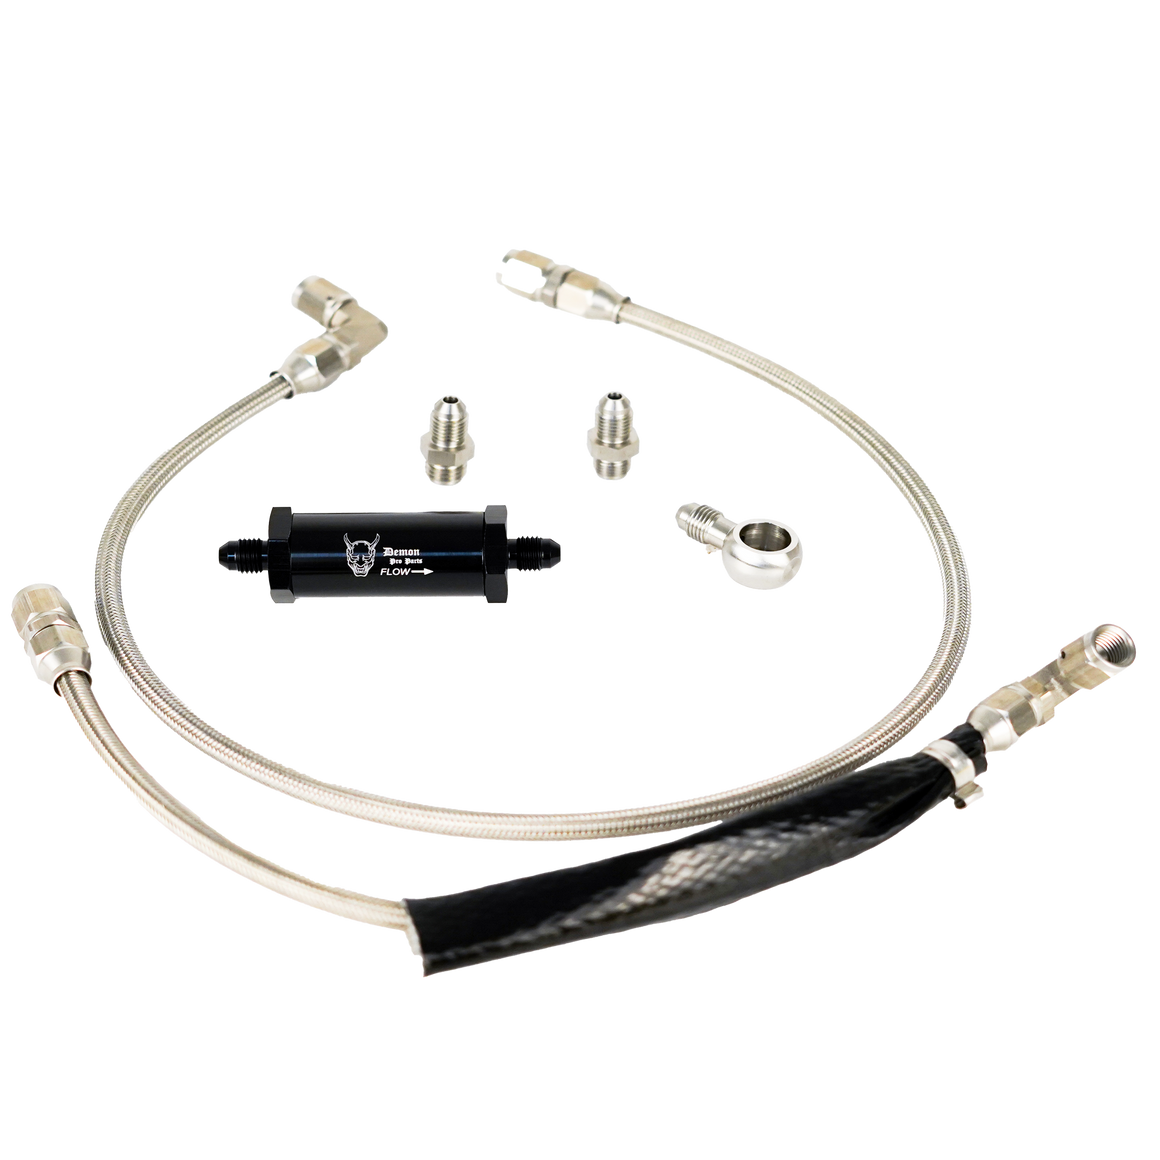 New Gen2 DPP Turbo Oil Feed Line Kit For Ford Falcon XR6 BA/BF/FG FPV F6 with GT3582R/GT3576